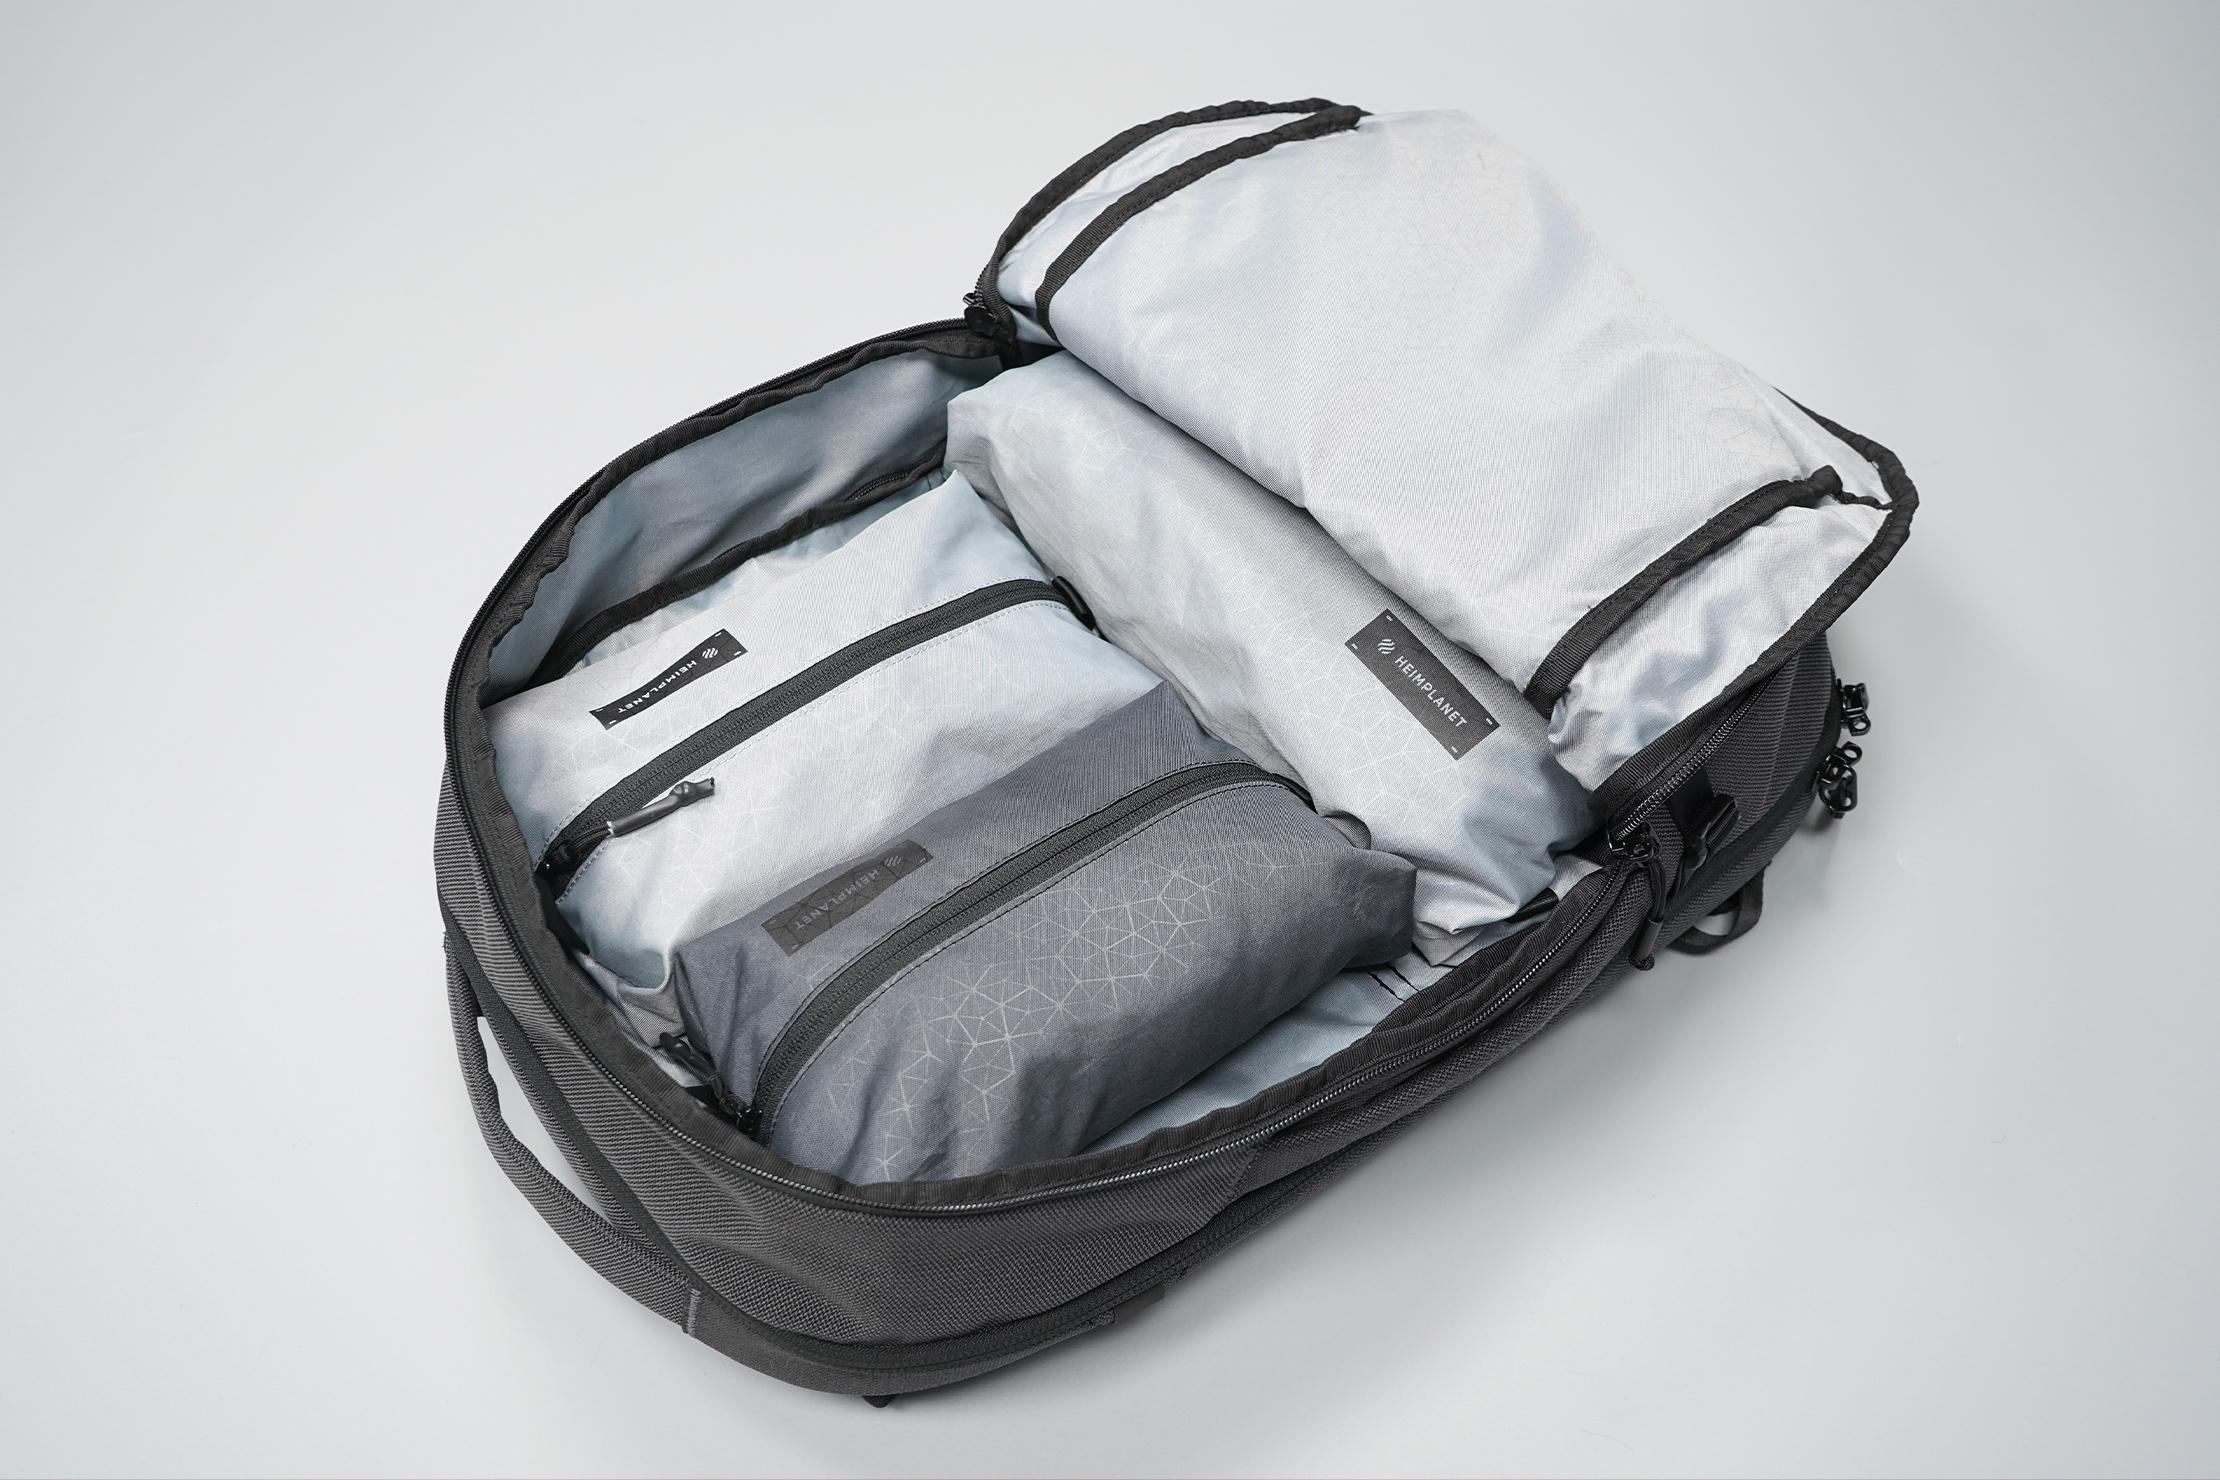 Heimplanet Travel Pack 34L V2 main compartment